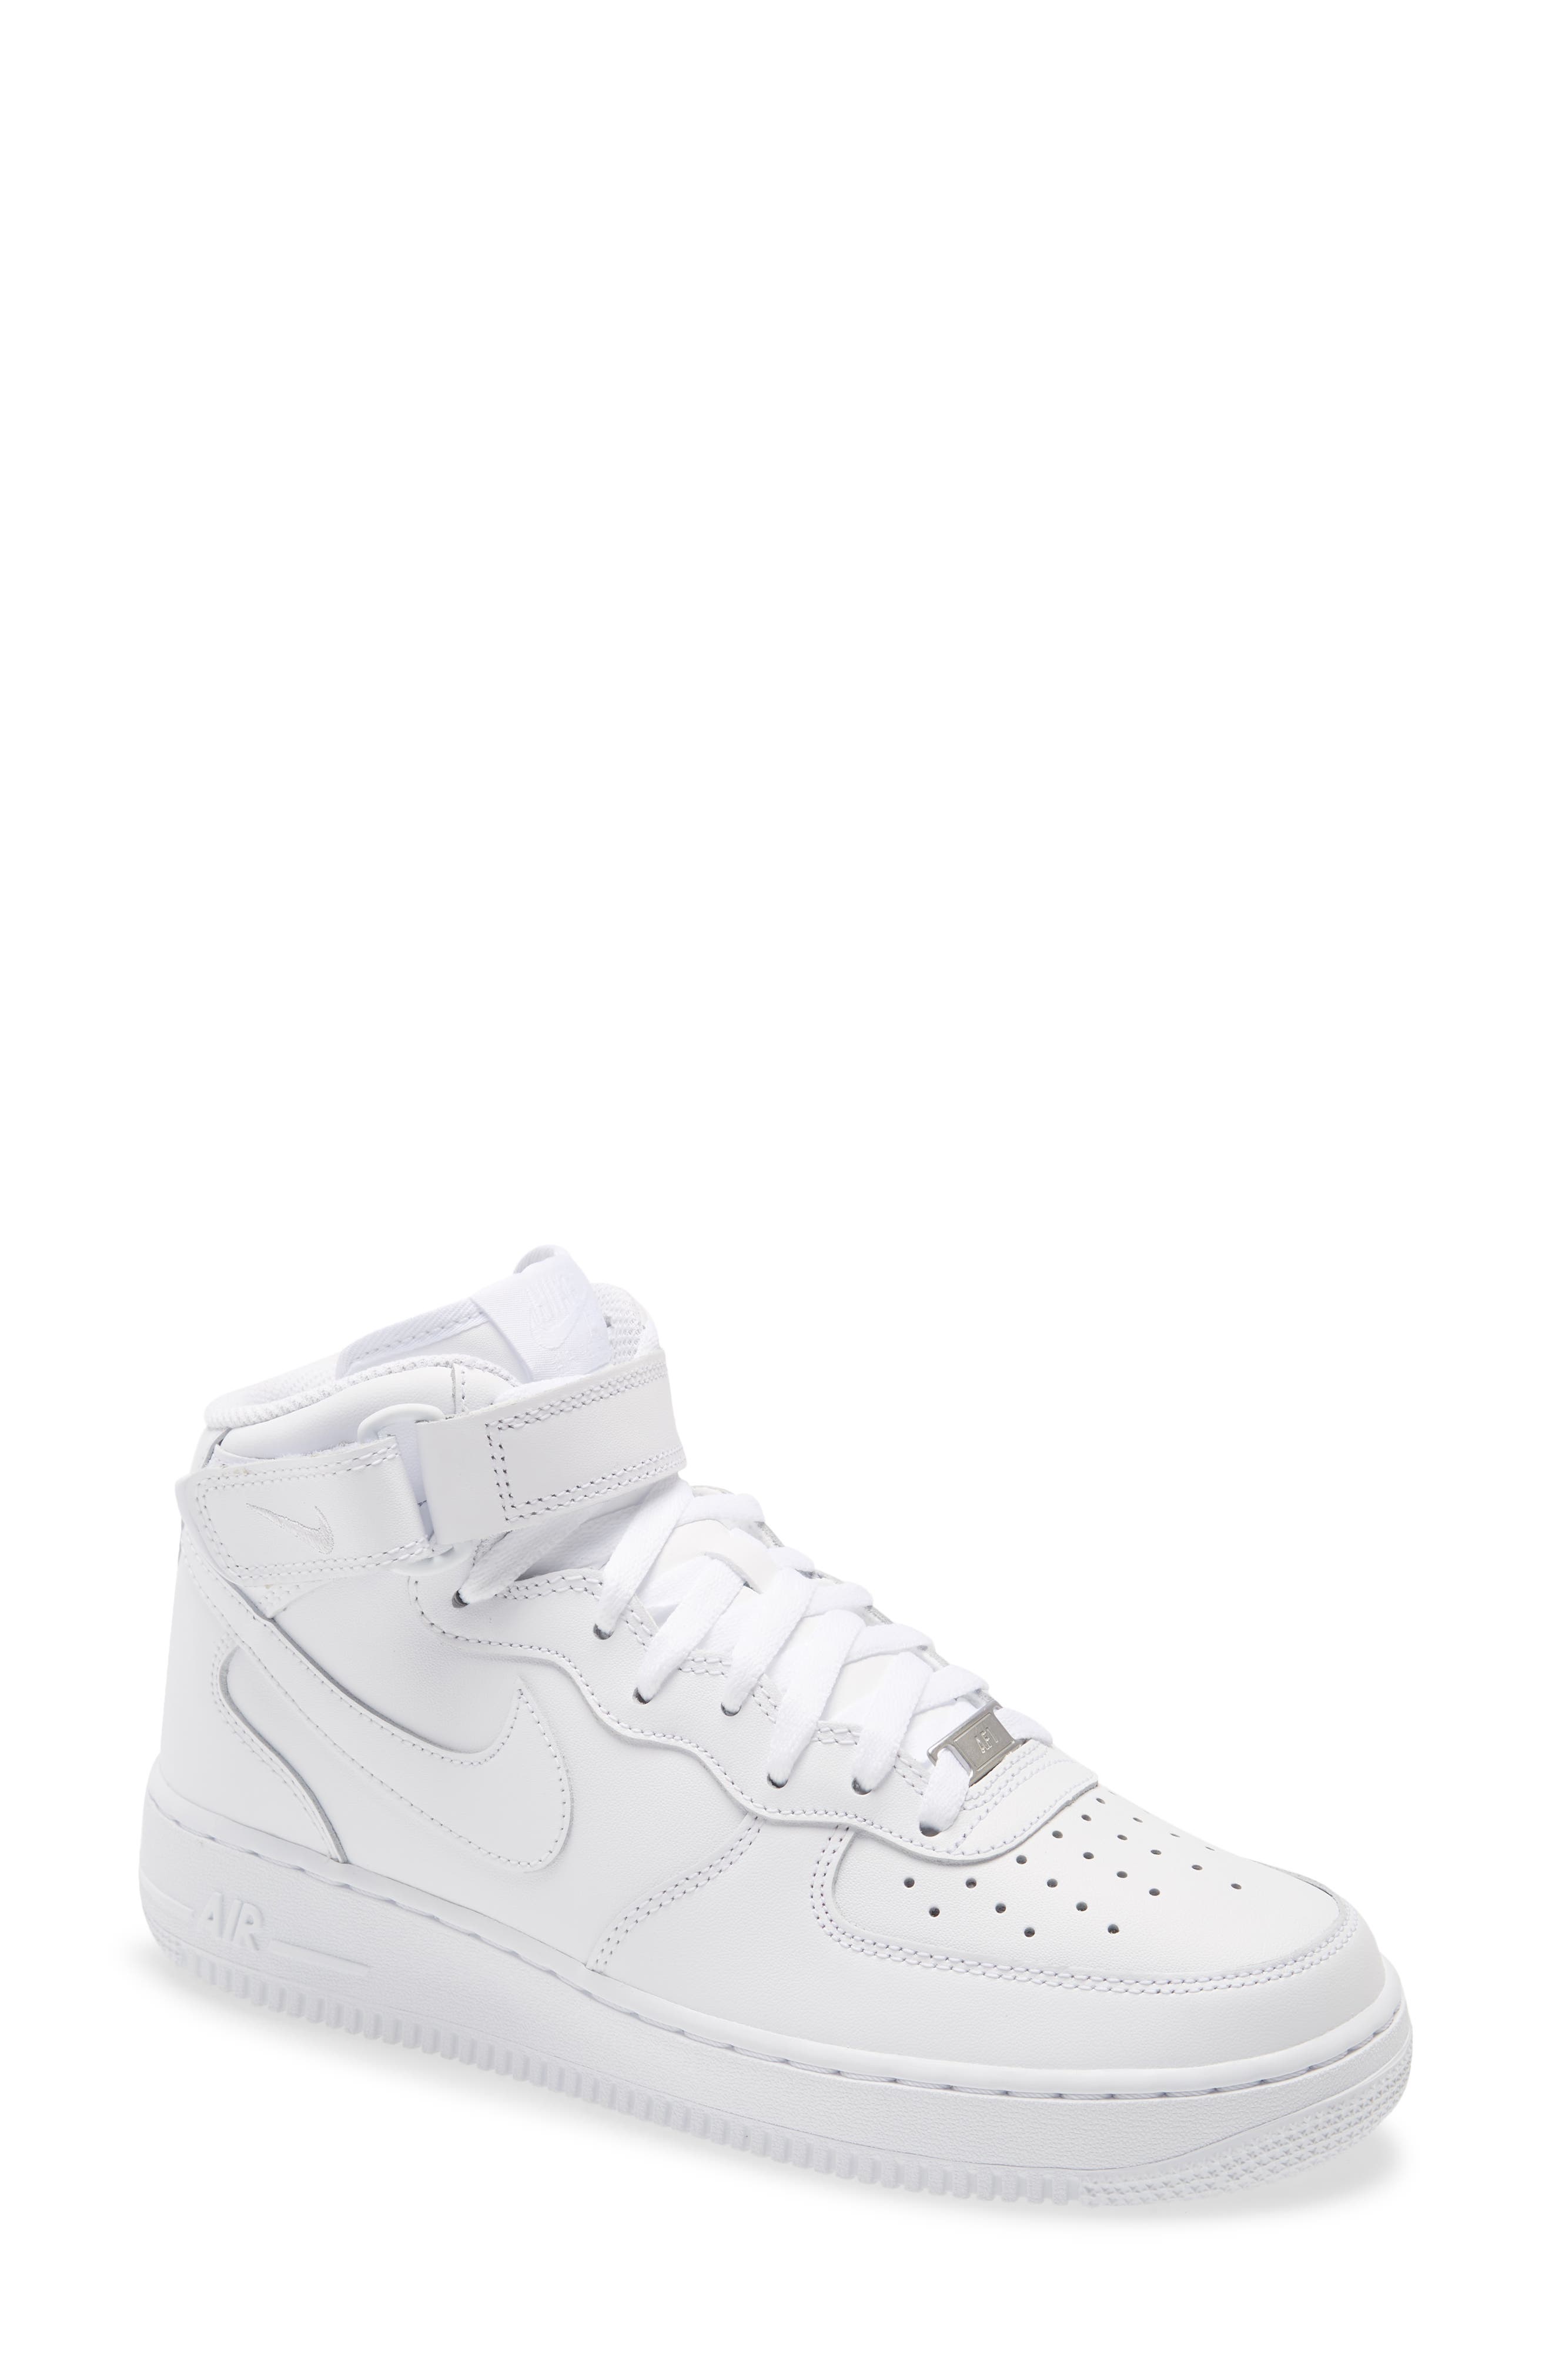 UPC 883412741231 product image for Men's Nike Air Force 1 Mid '07 Sneaker, Size 8 M - White | upcitemdb.com